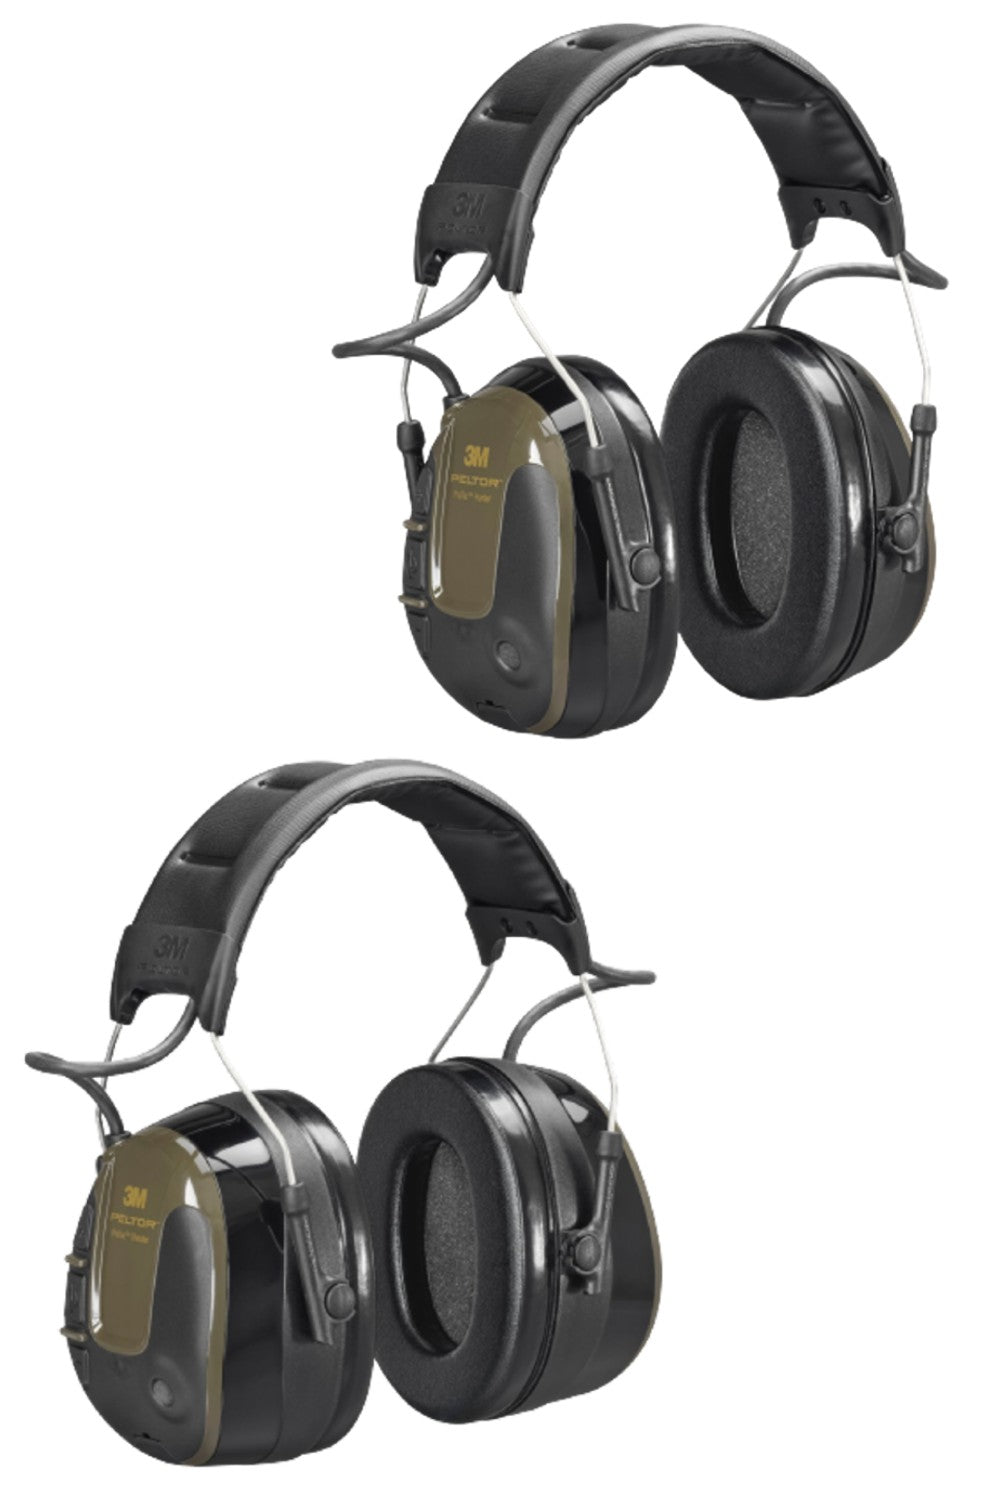 Peltor 3M ProTac Electronic Muffs In Hunter and Shooter